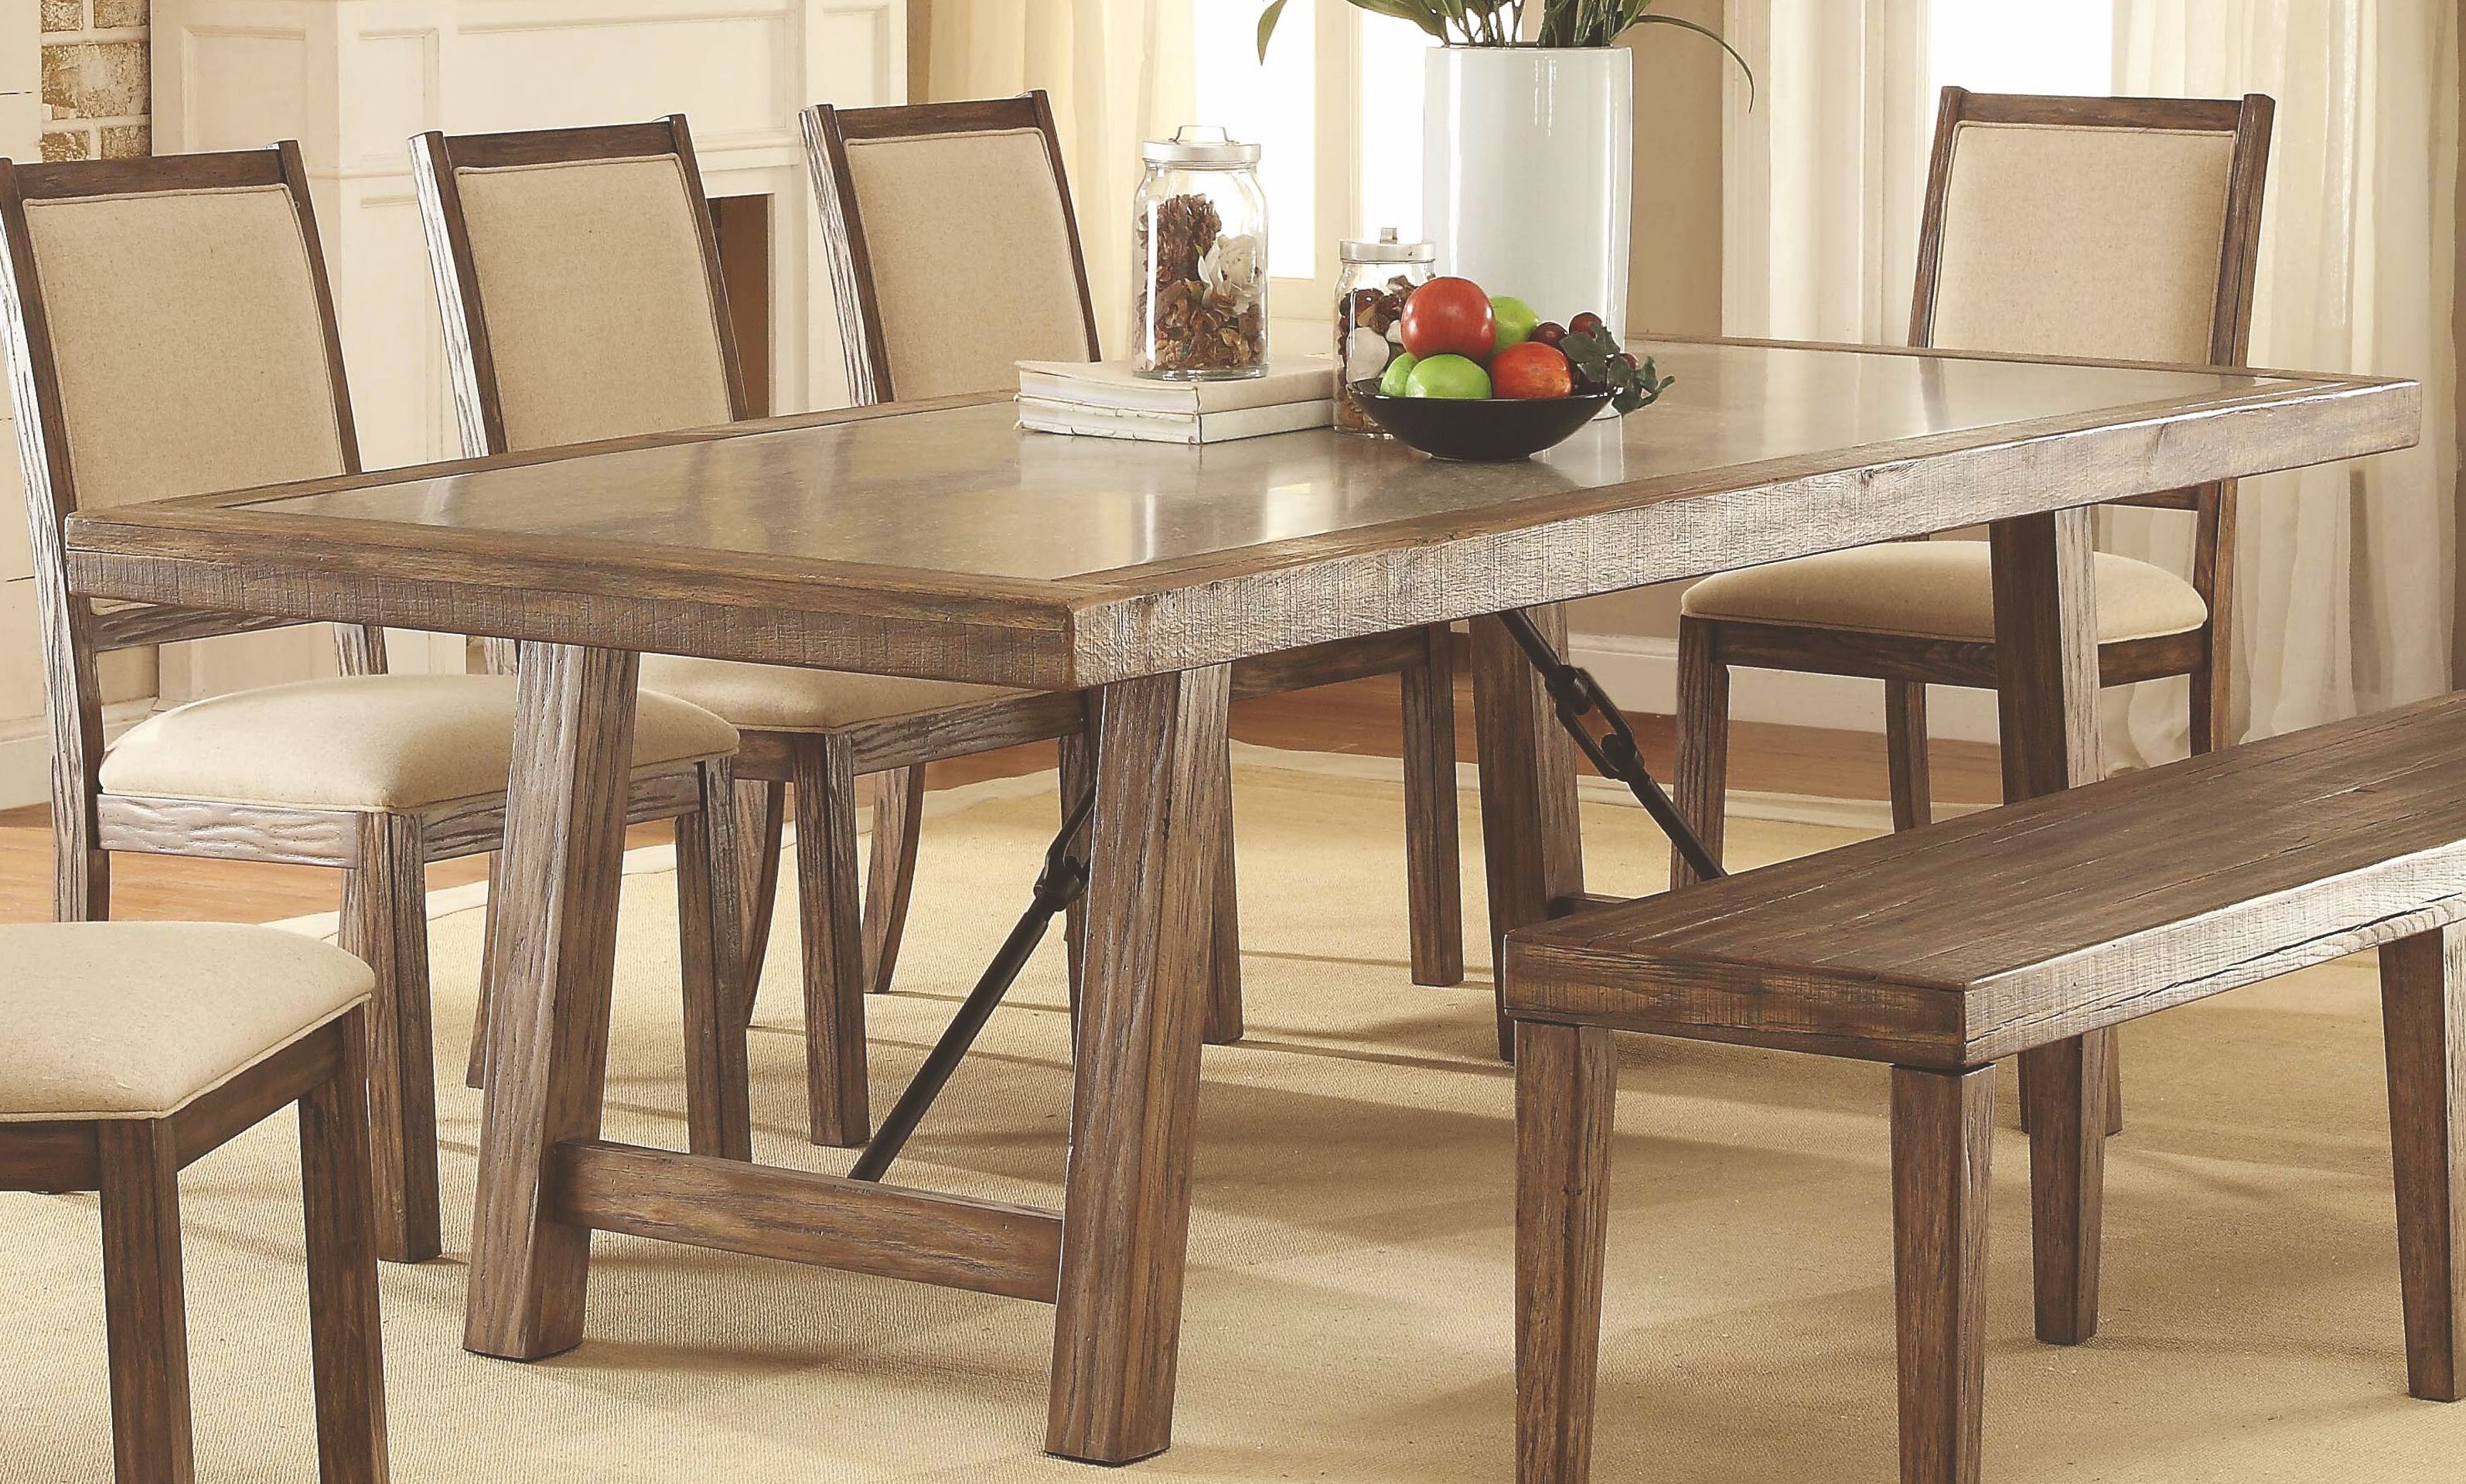 Best Rustic Dining Room Table Ideas in 2022